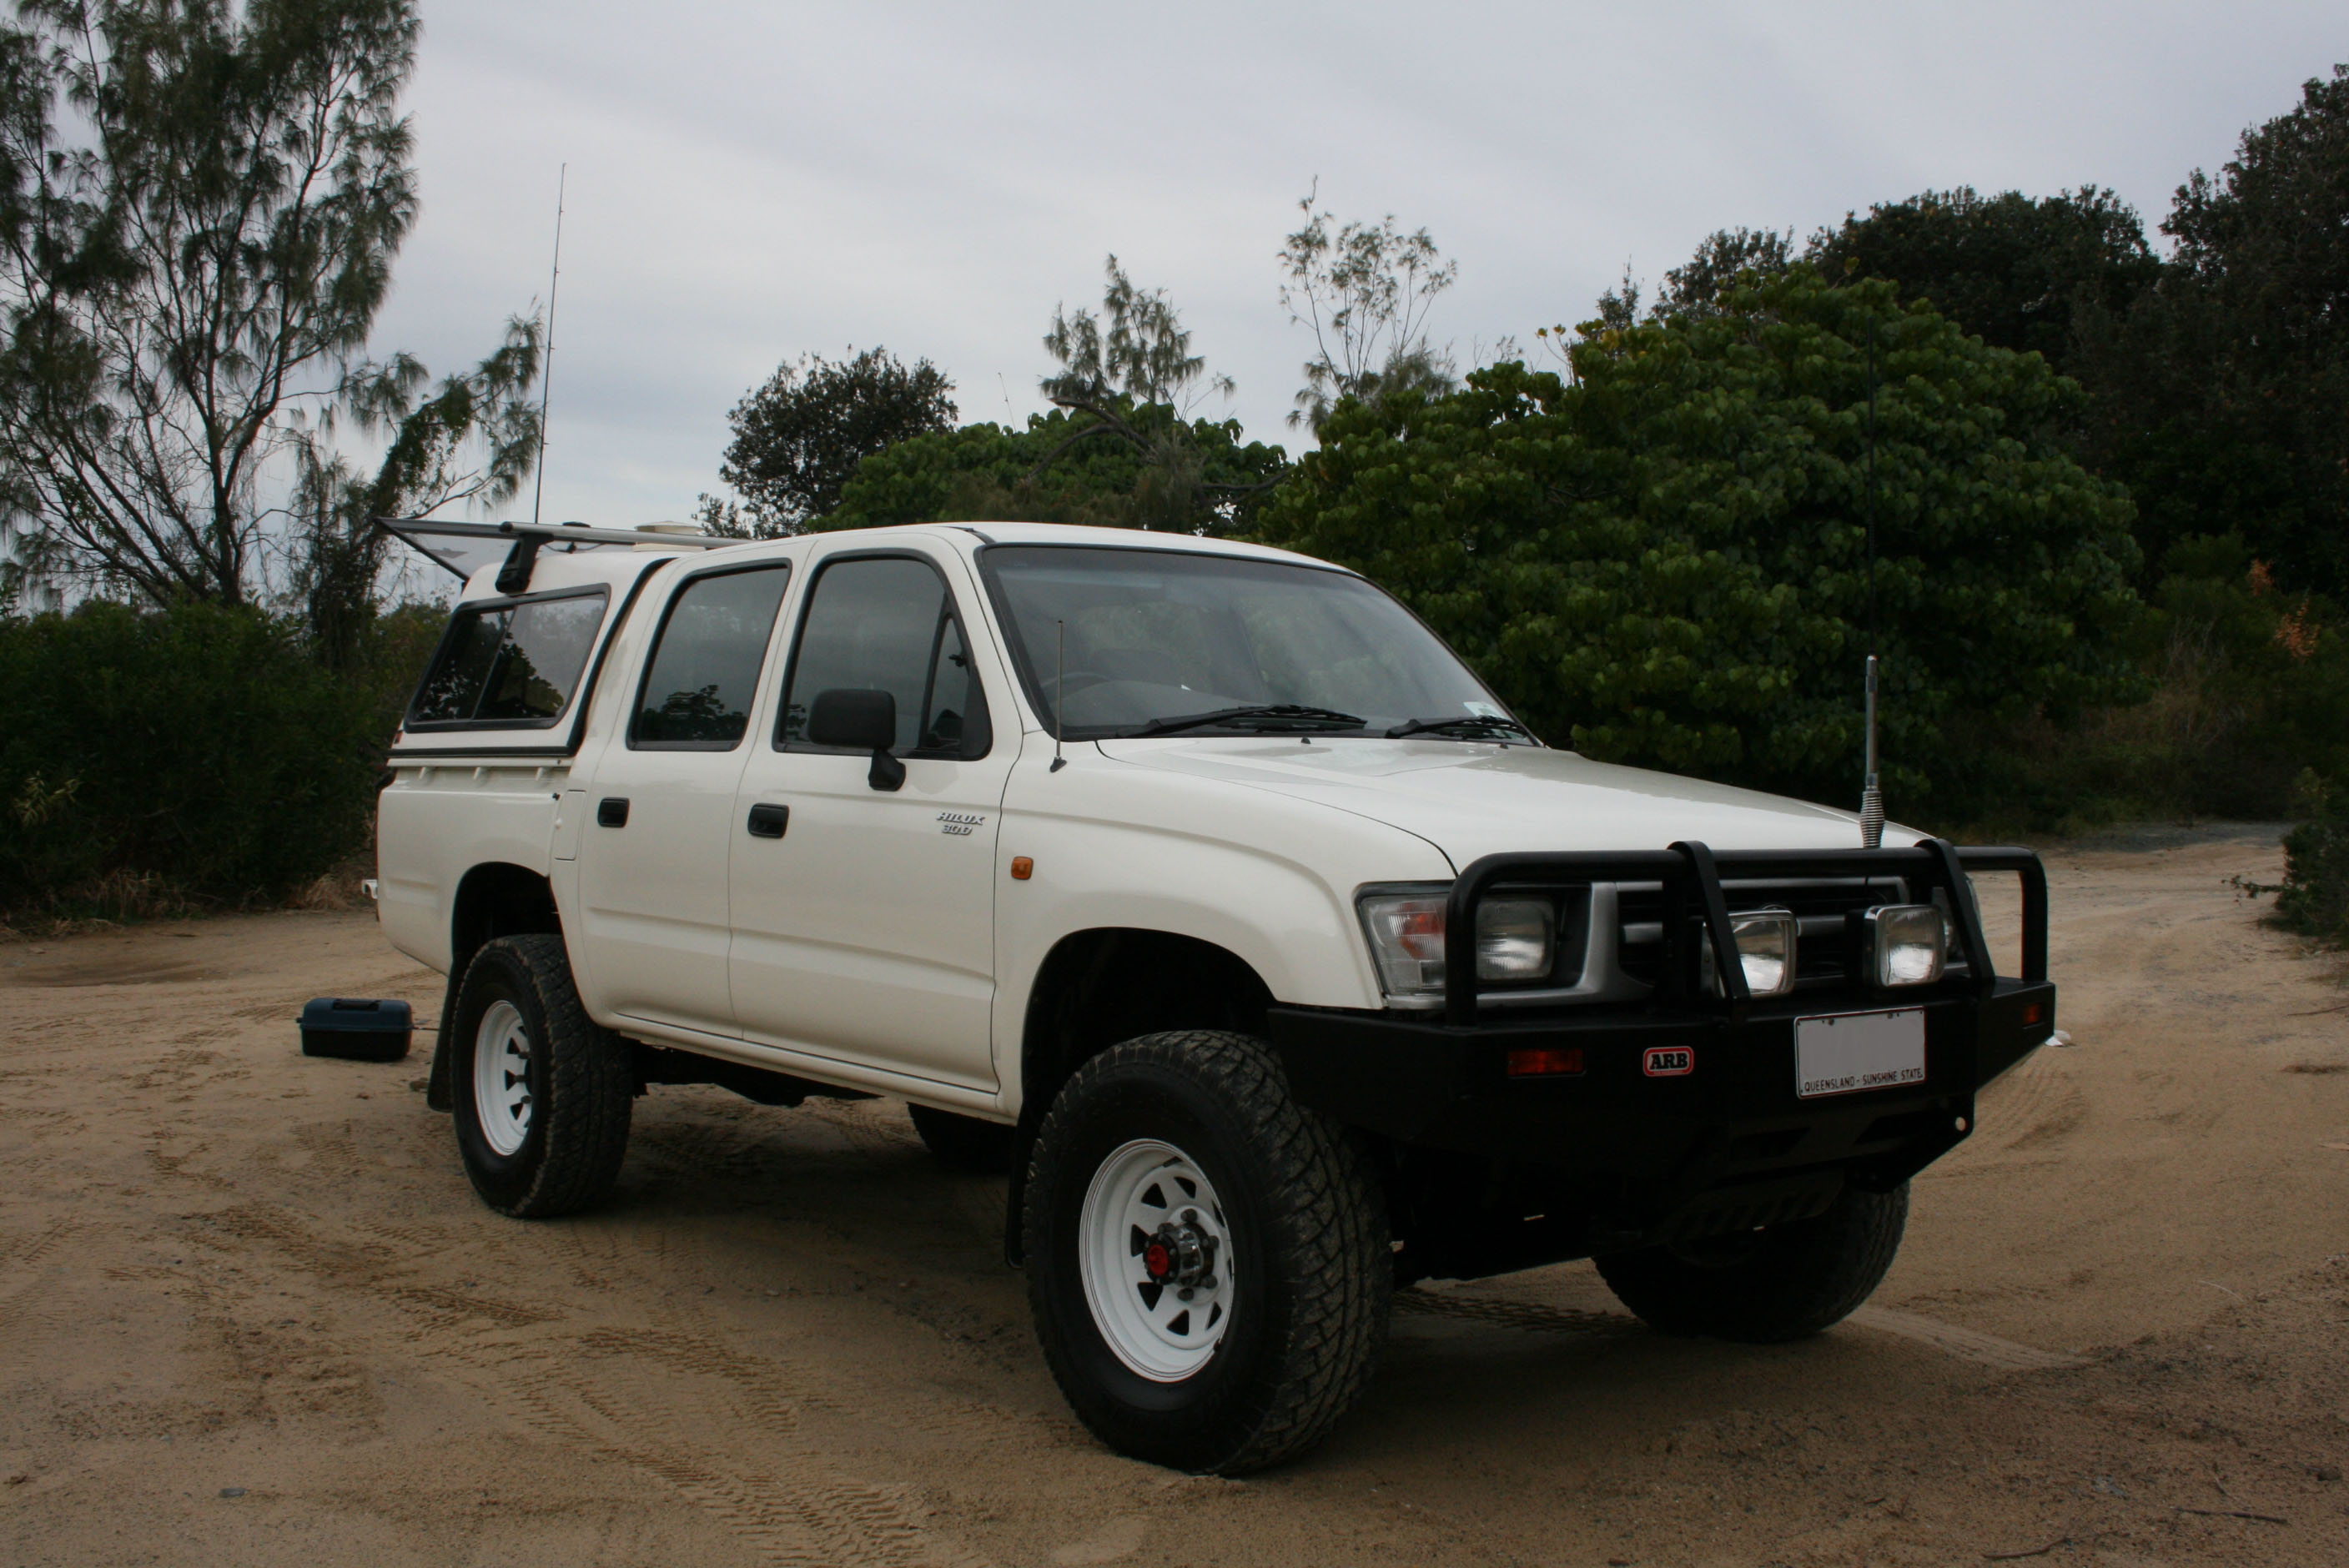 Toyota Hilux 2001-2006 4WD and 2WD Workshop Manual Digital Download